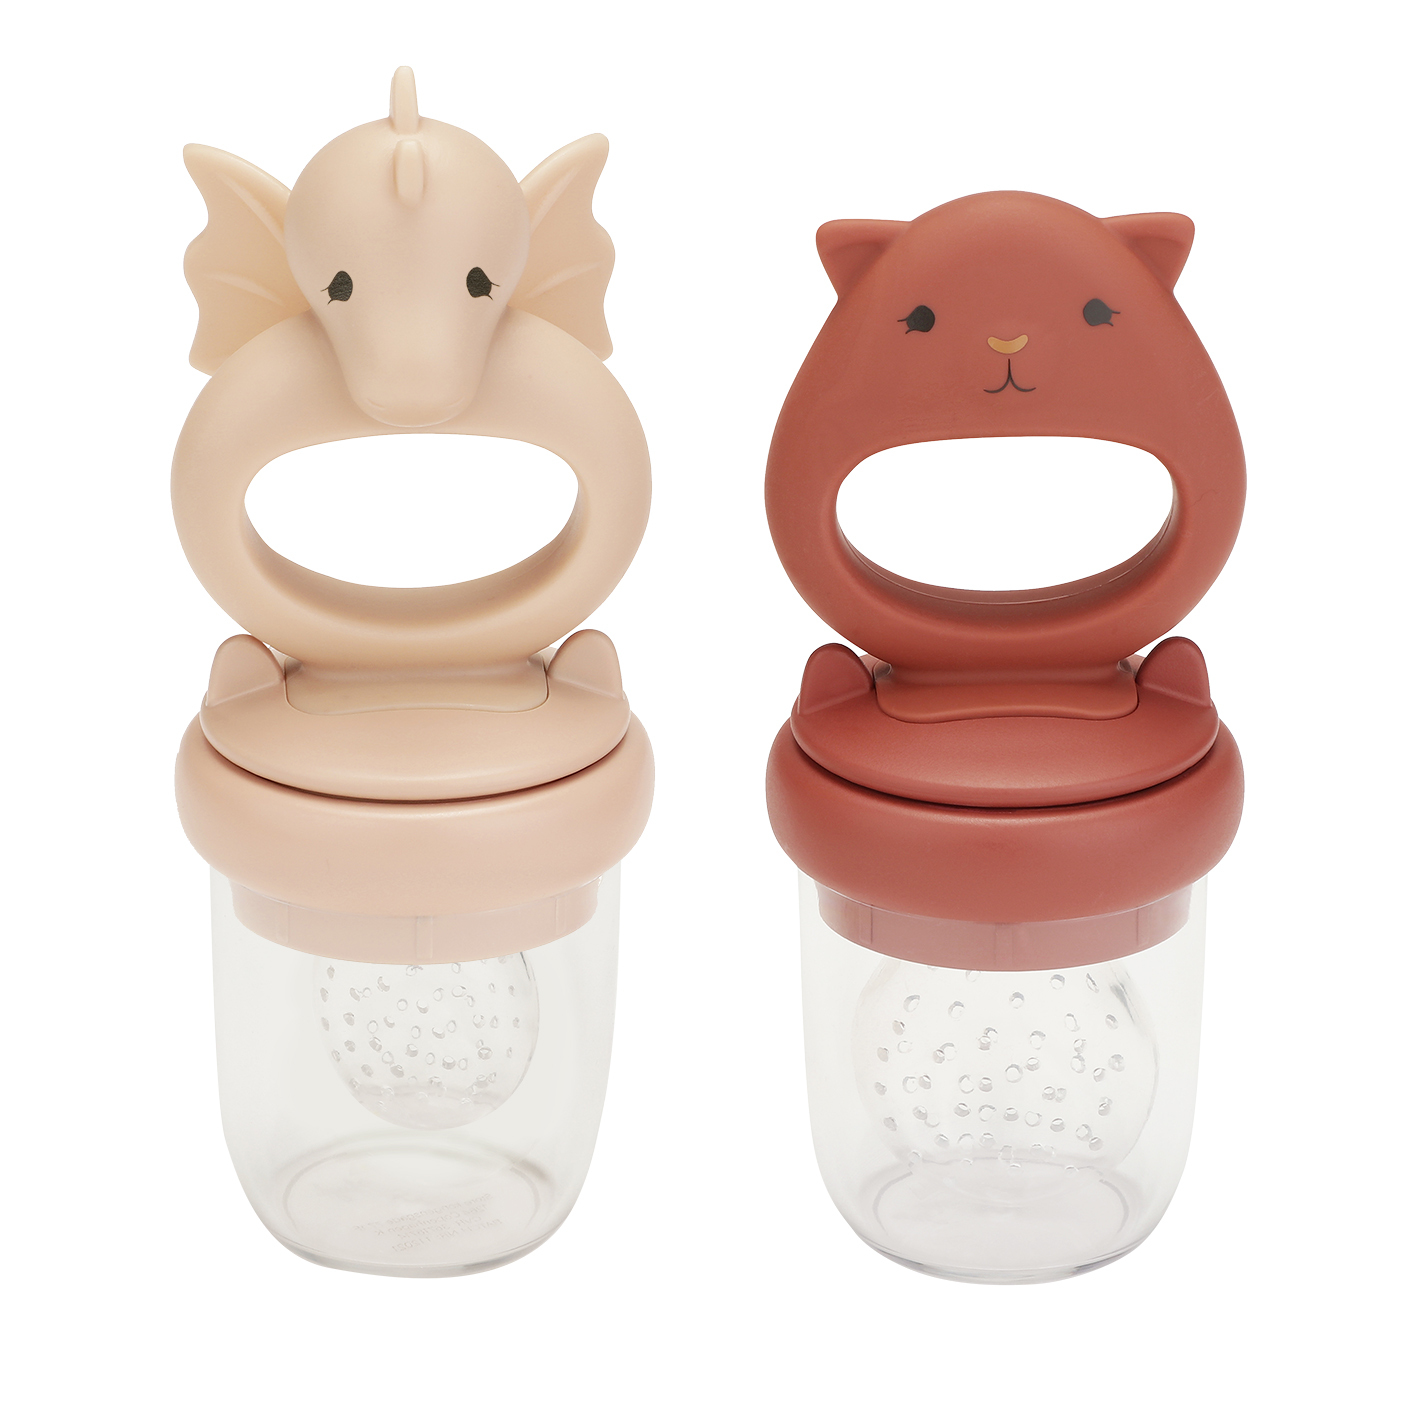 KS3581 - 2 PACK FRUIT FEEDING PACIFIER DRAGON - ROSE SAND-COPPER BROWN - Extra 1